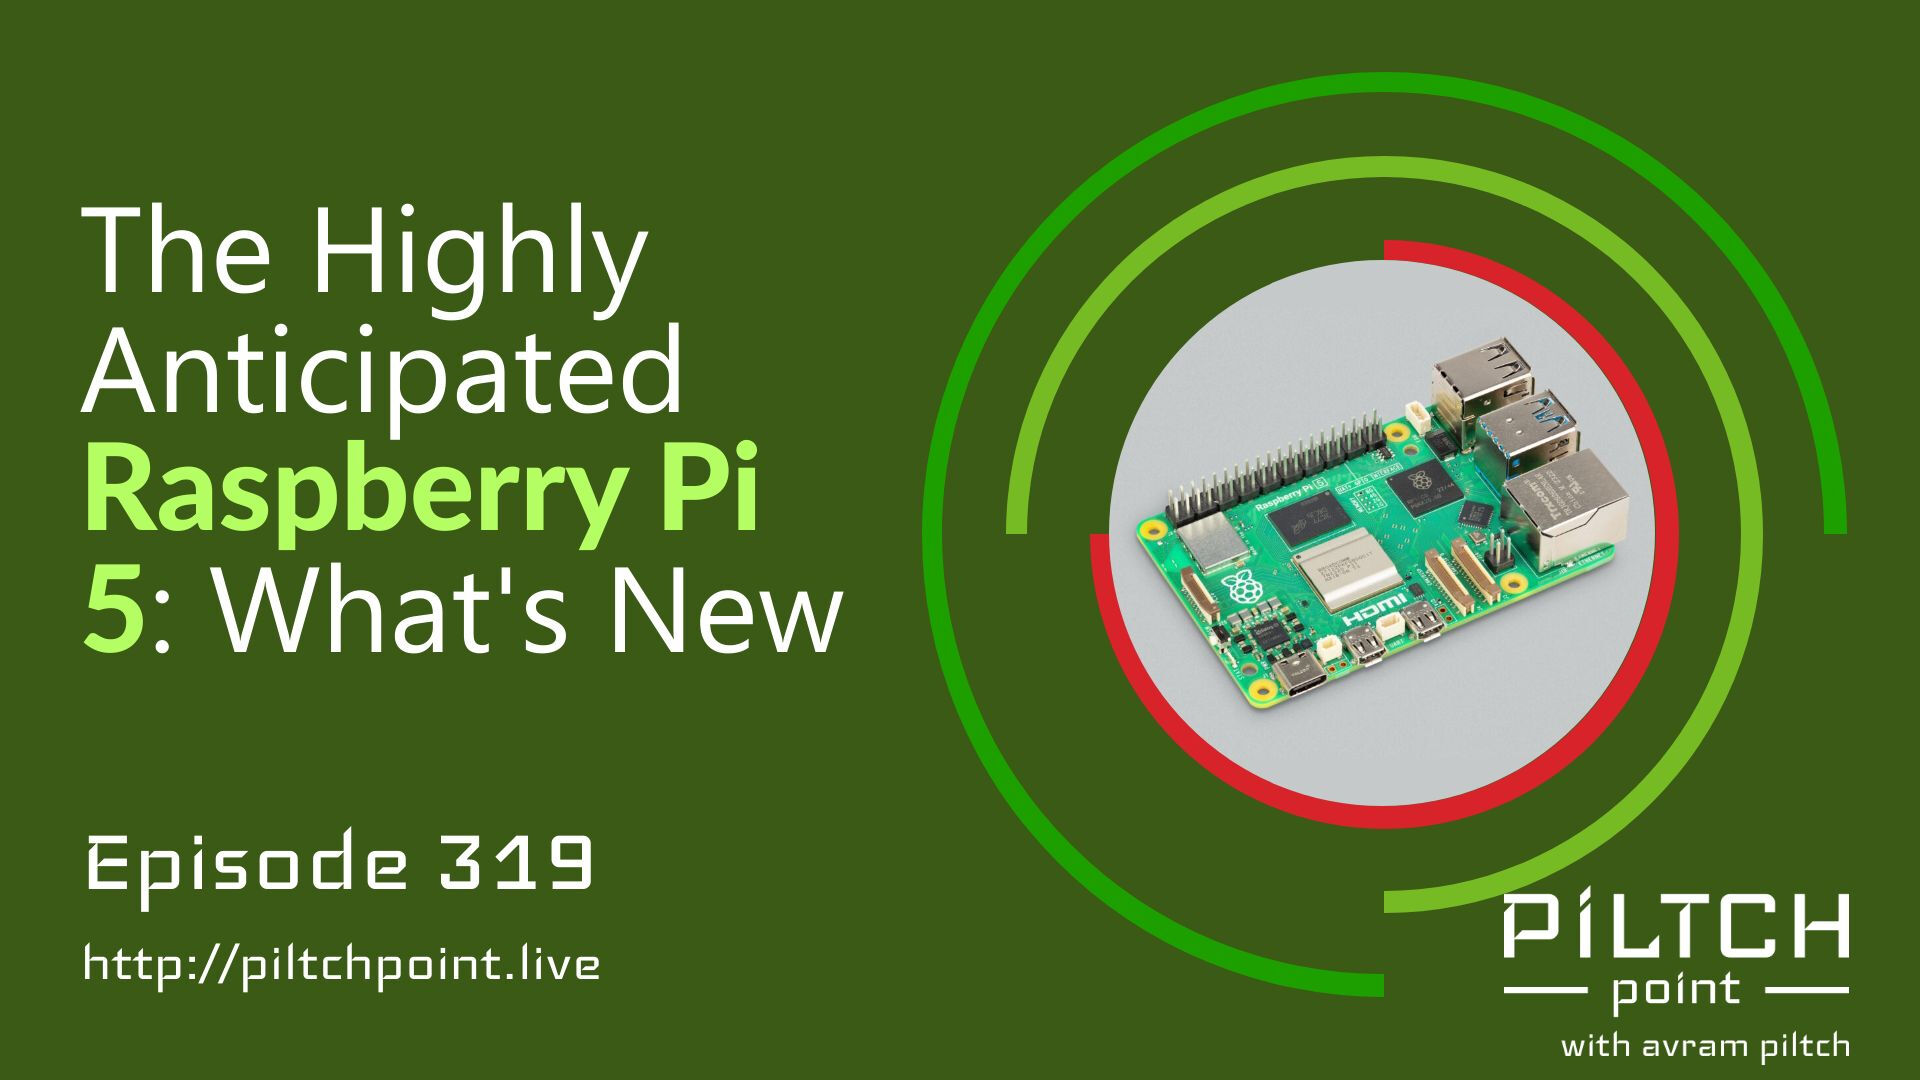 We have the New Raspberry Pi5 - Software Cornwall